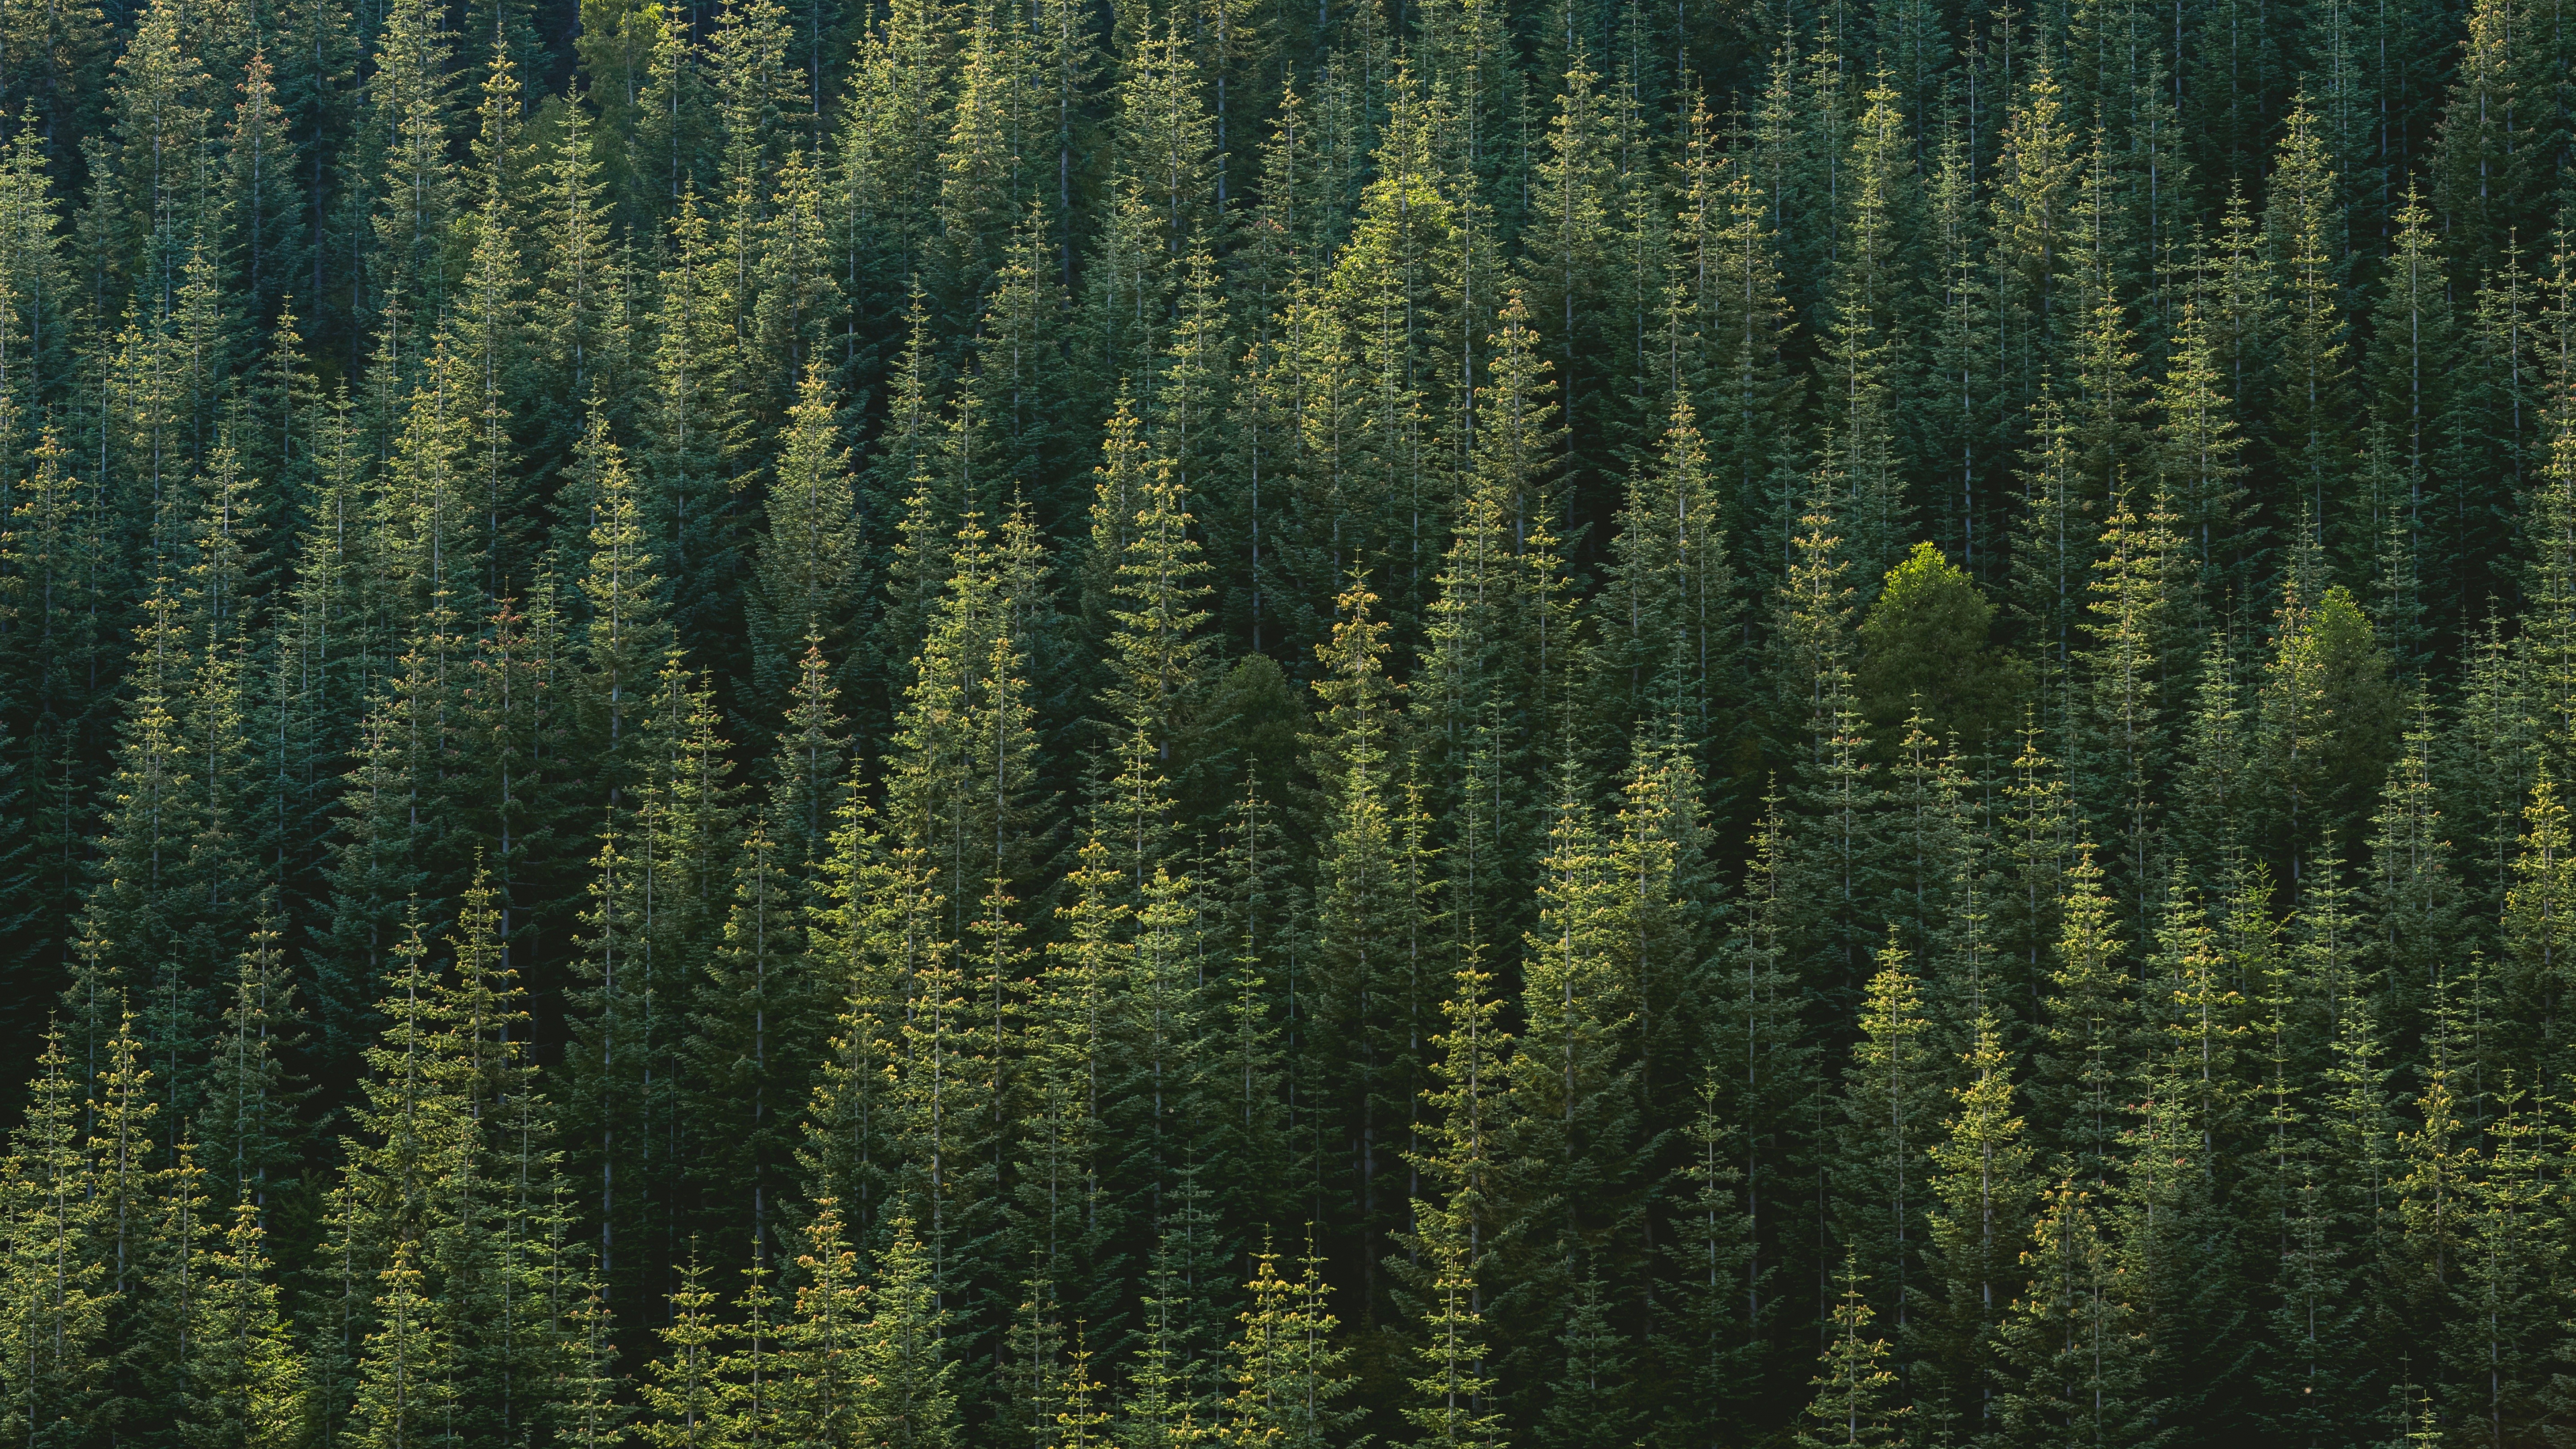 Desktop Wallpaper Green Trees, Forest, Aerial View, Nature, 5k, HD Image, Picture, Background, Et4itf